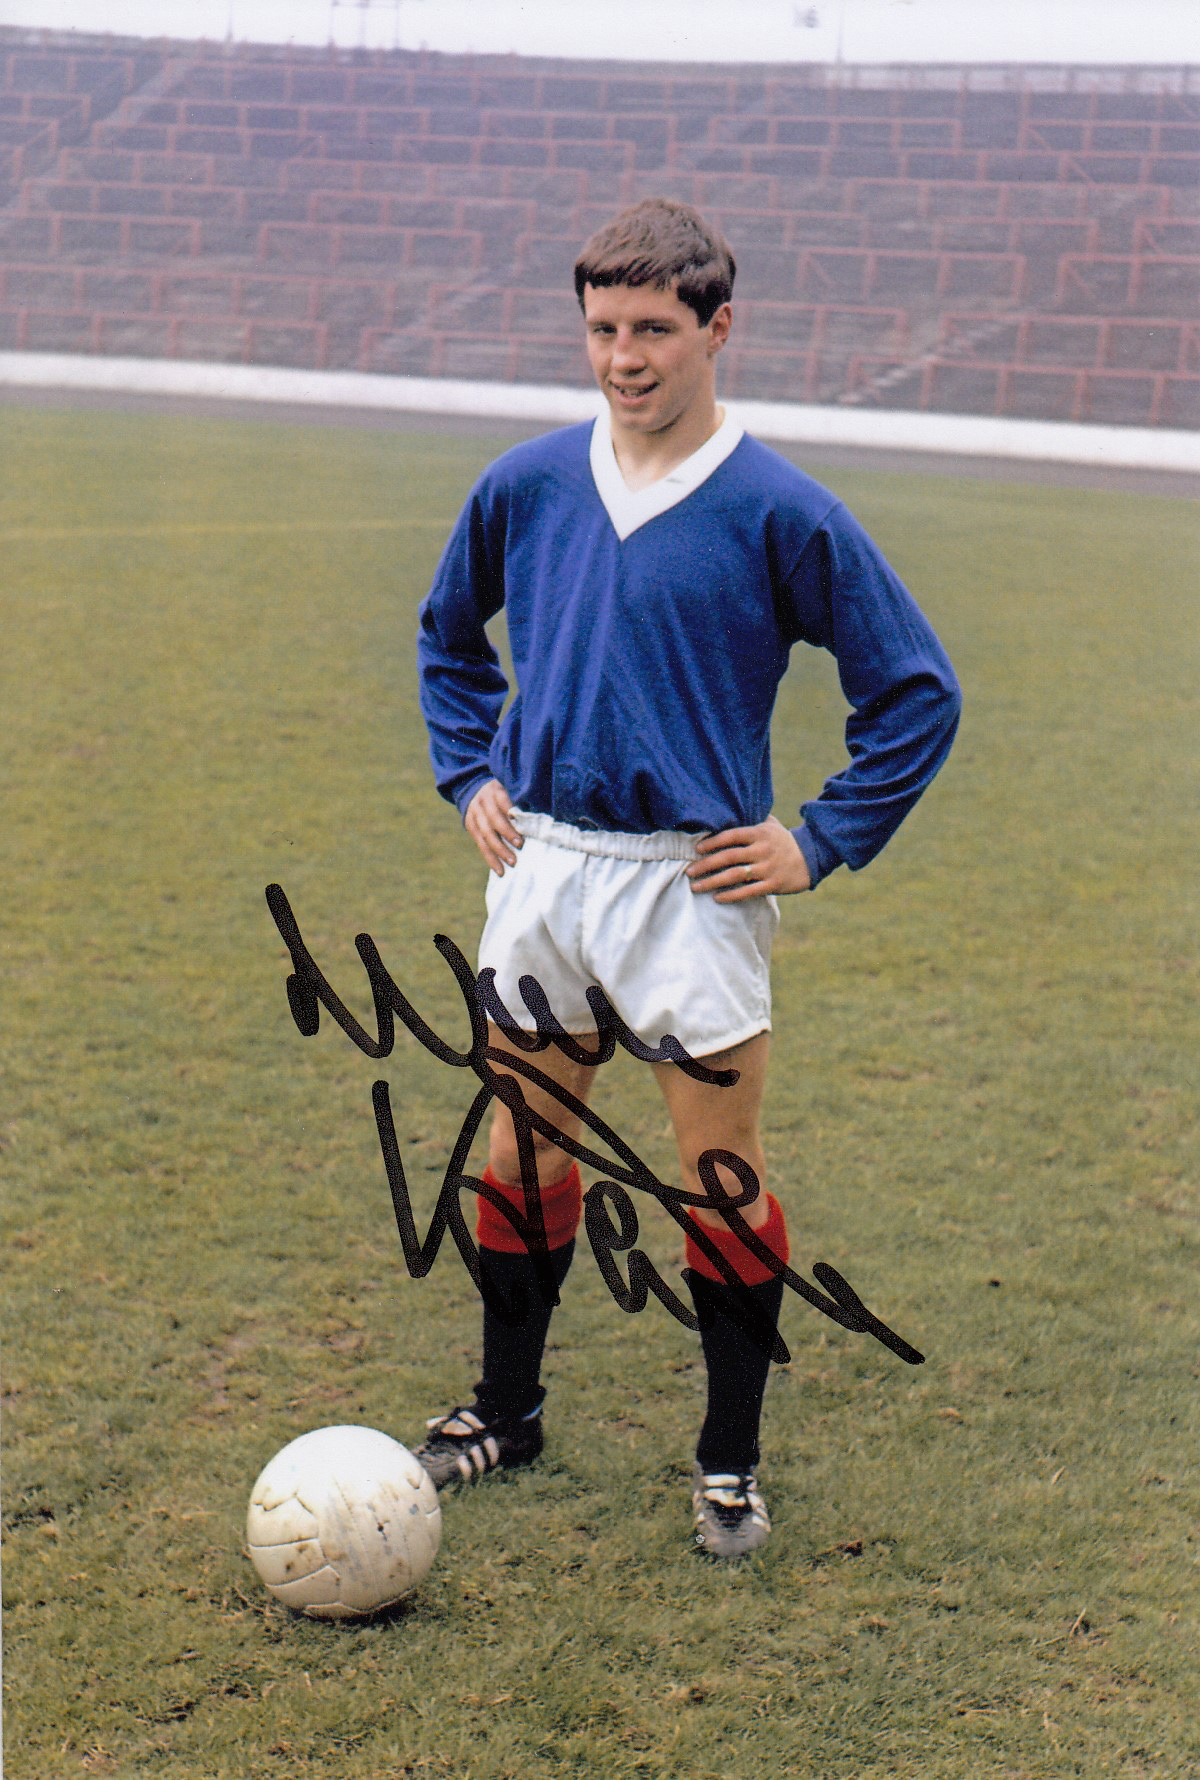 WILLIE HENDERSON 1964: Autographed 6 x 4 photo, depicting Rangers winger WILLIE HENDERSON striking a